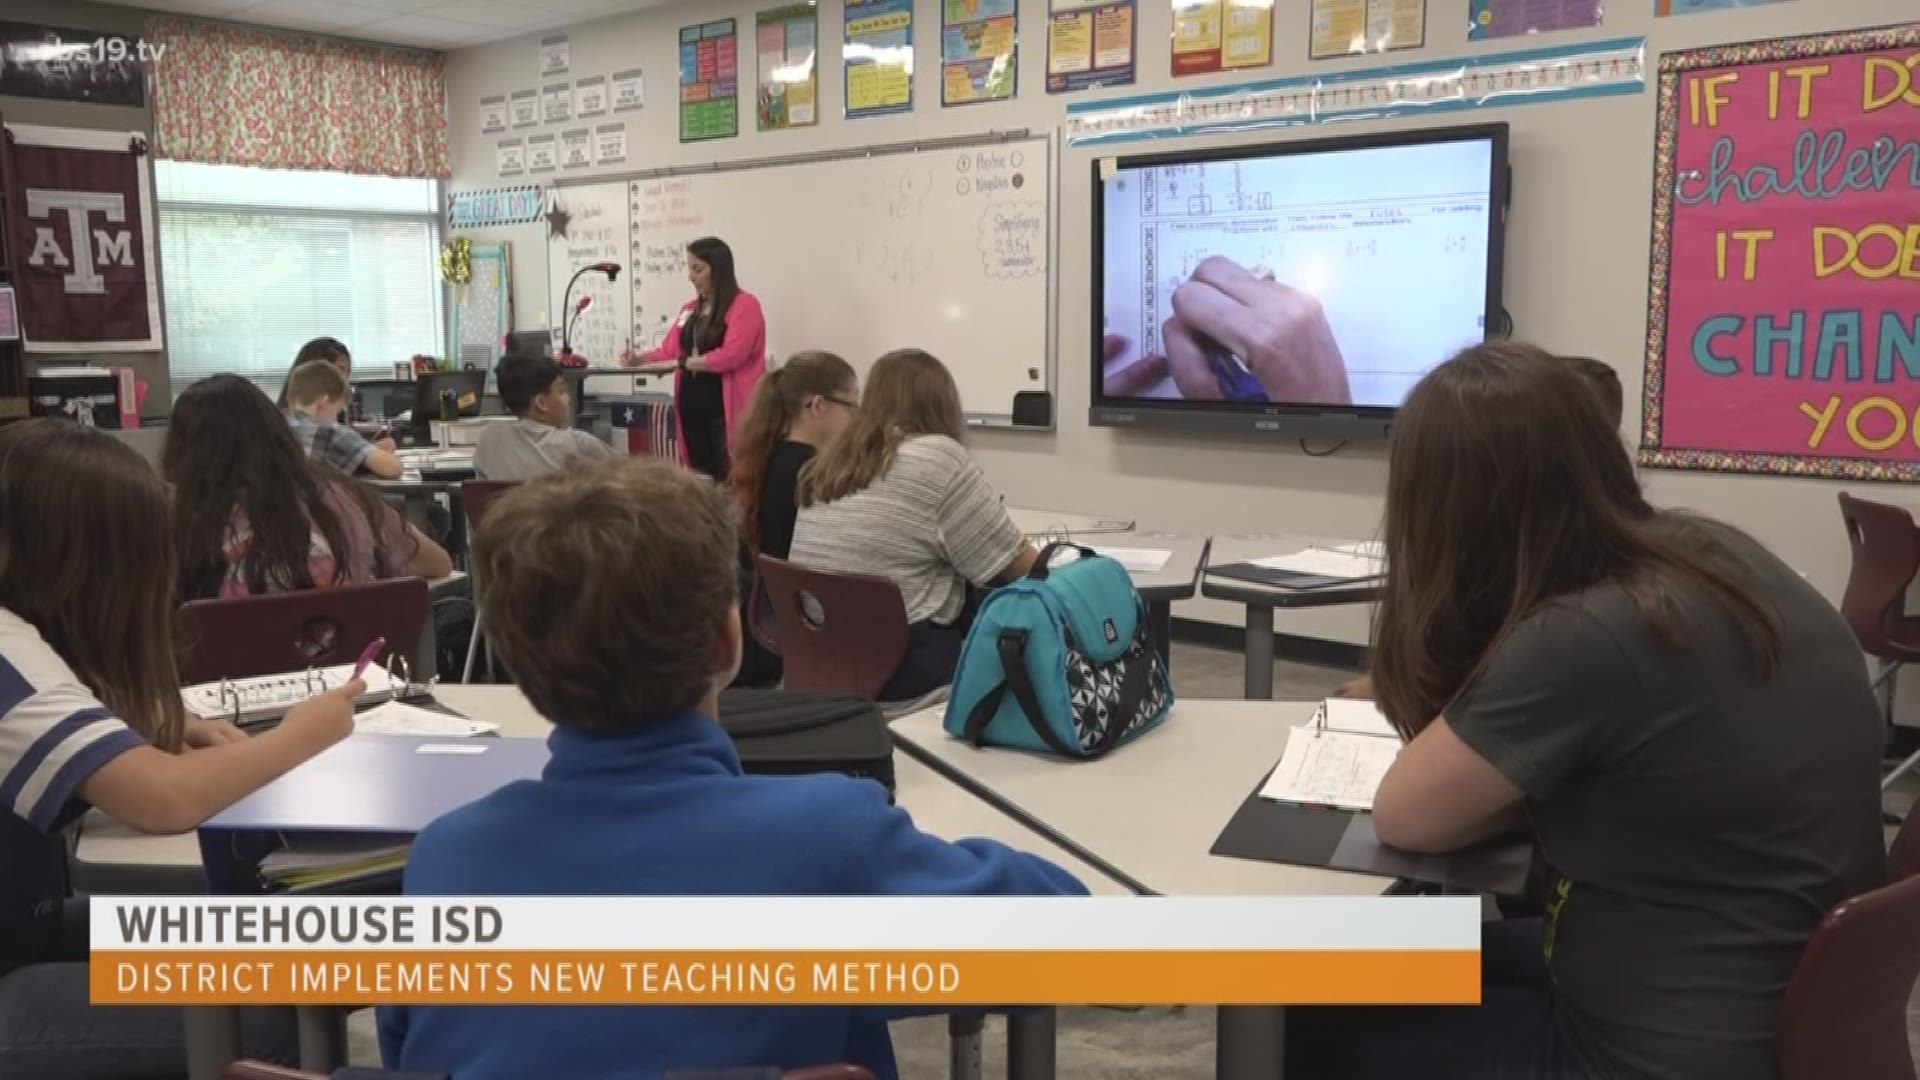 Whitehouse ISD is using a new teaching method called formative assessment to help students learn.